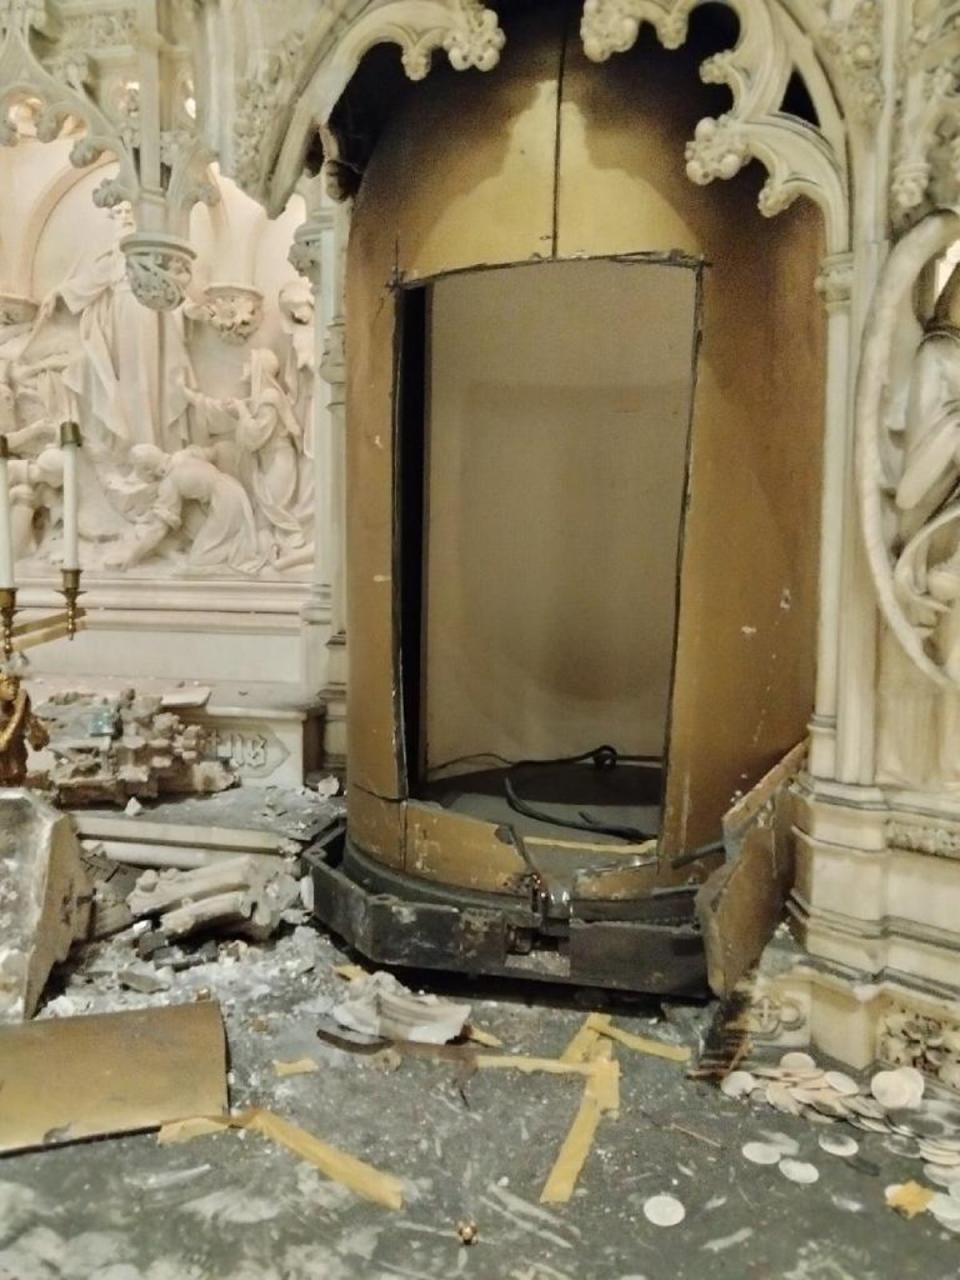 Thieves sawed the tabernacle off the church’s alter. (Diocese of Brooklyn)